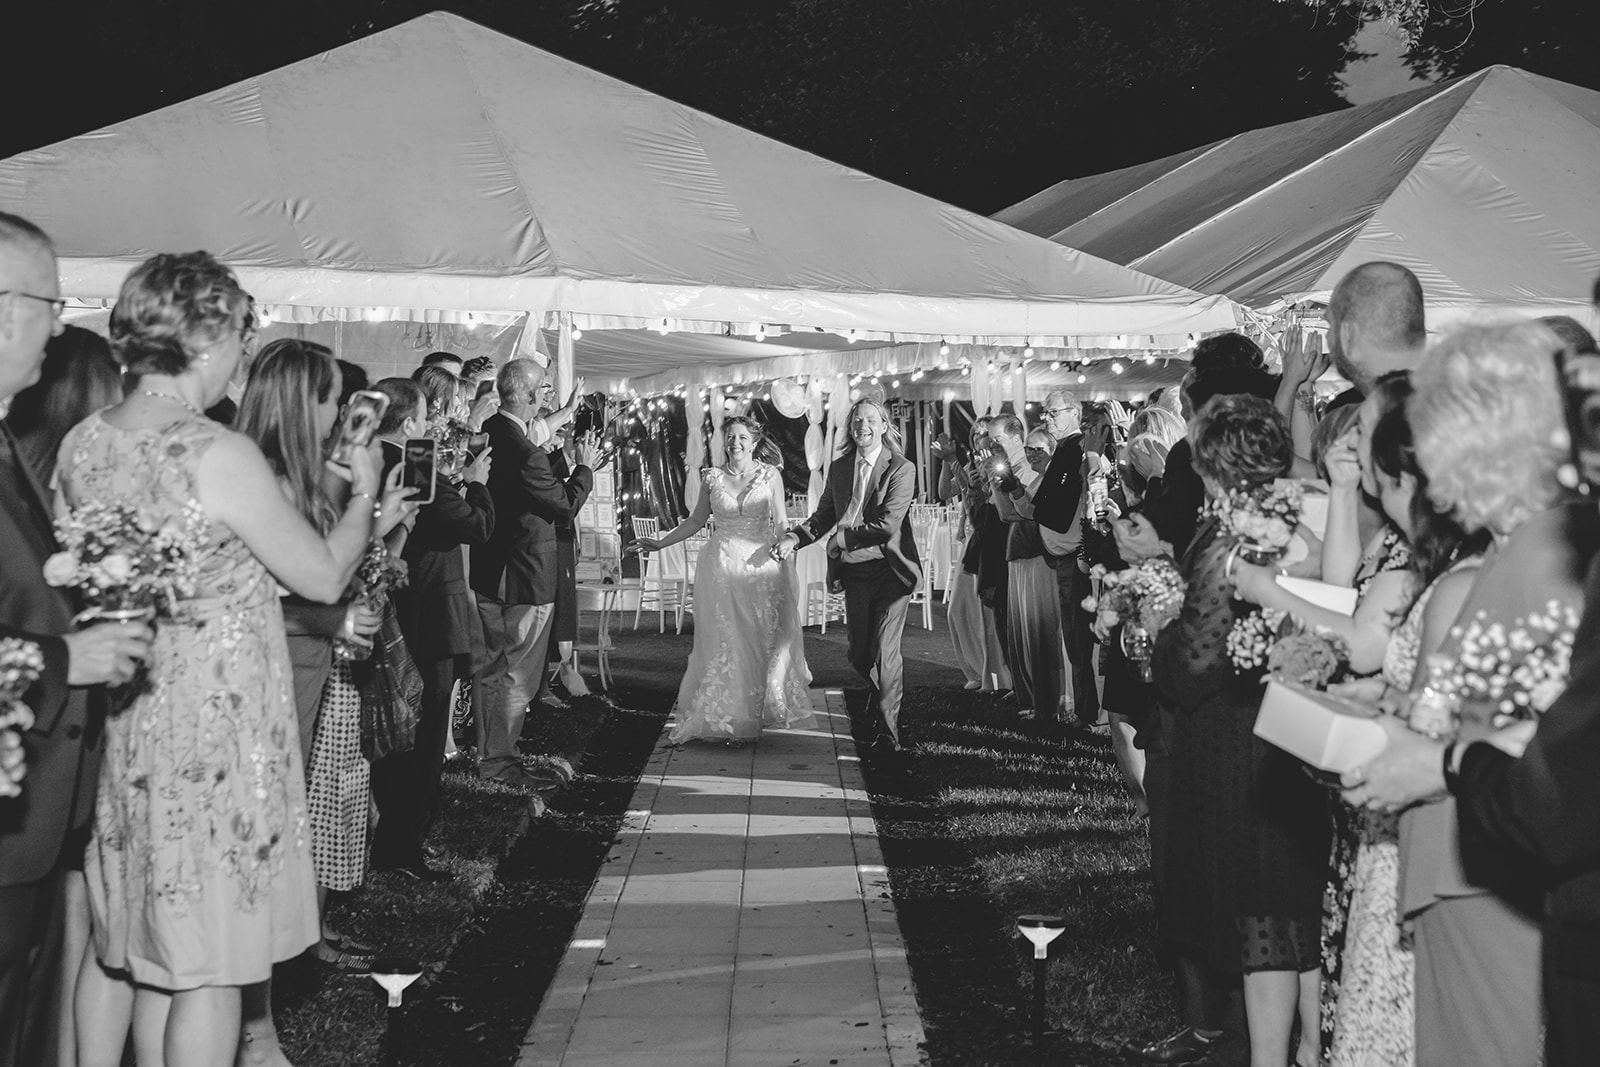 The send off -- guests lined the sidewalk from the tent to wish the couple well.